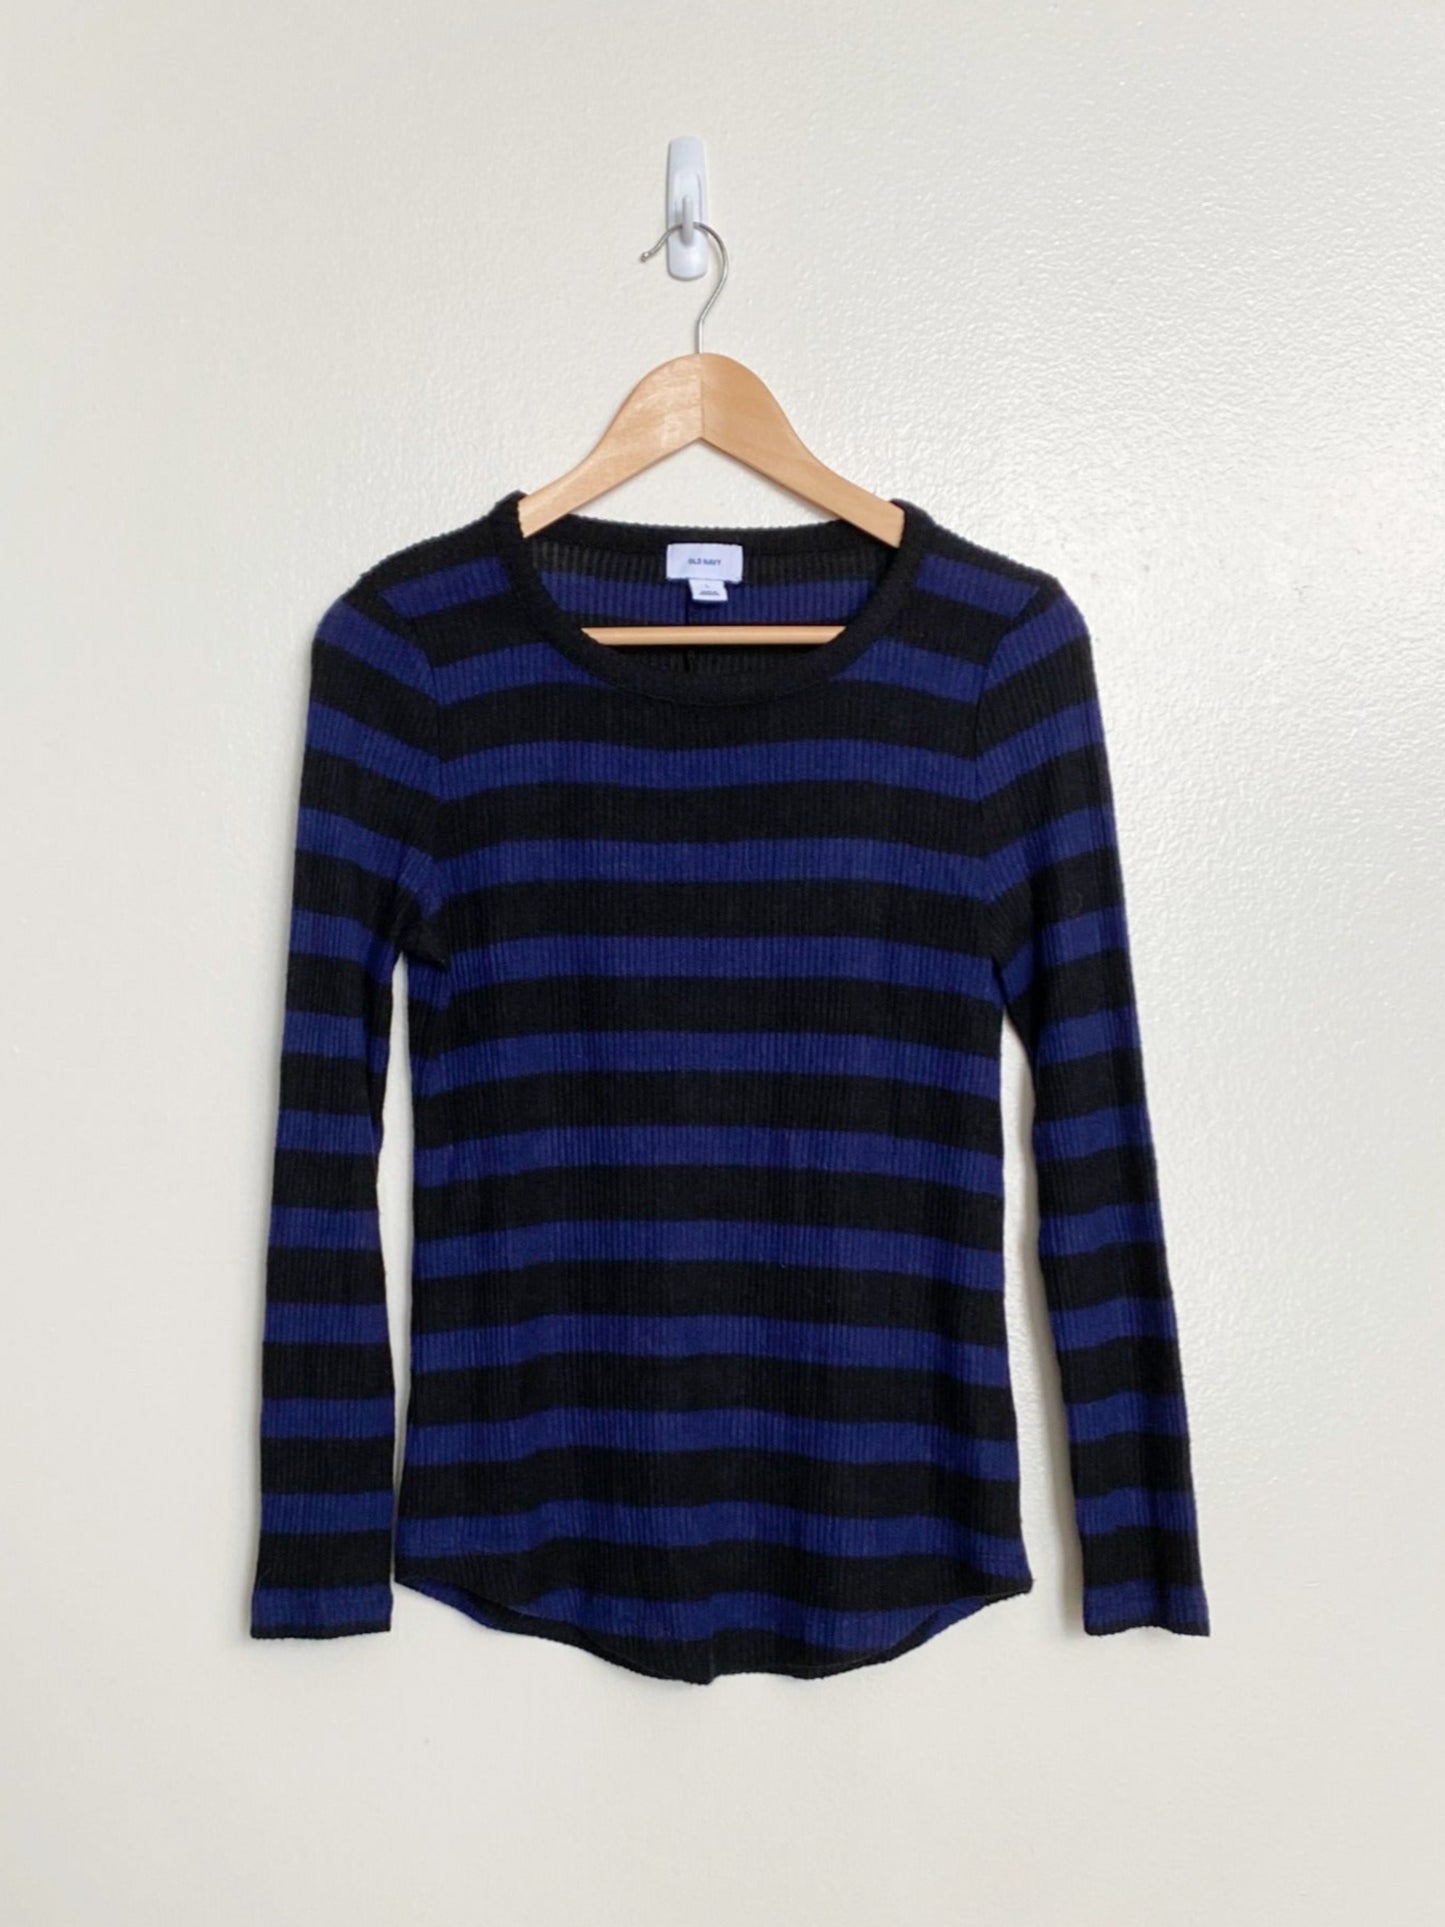 Striped Knit Top (Small)